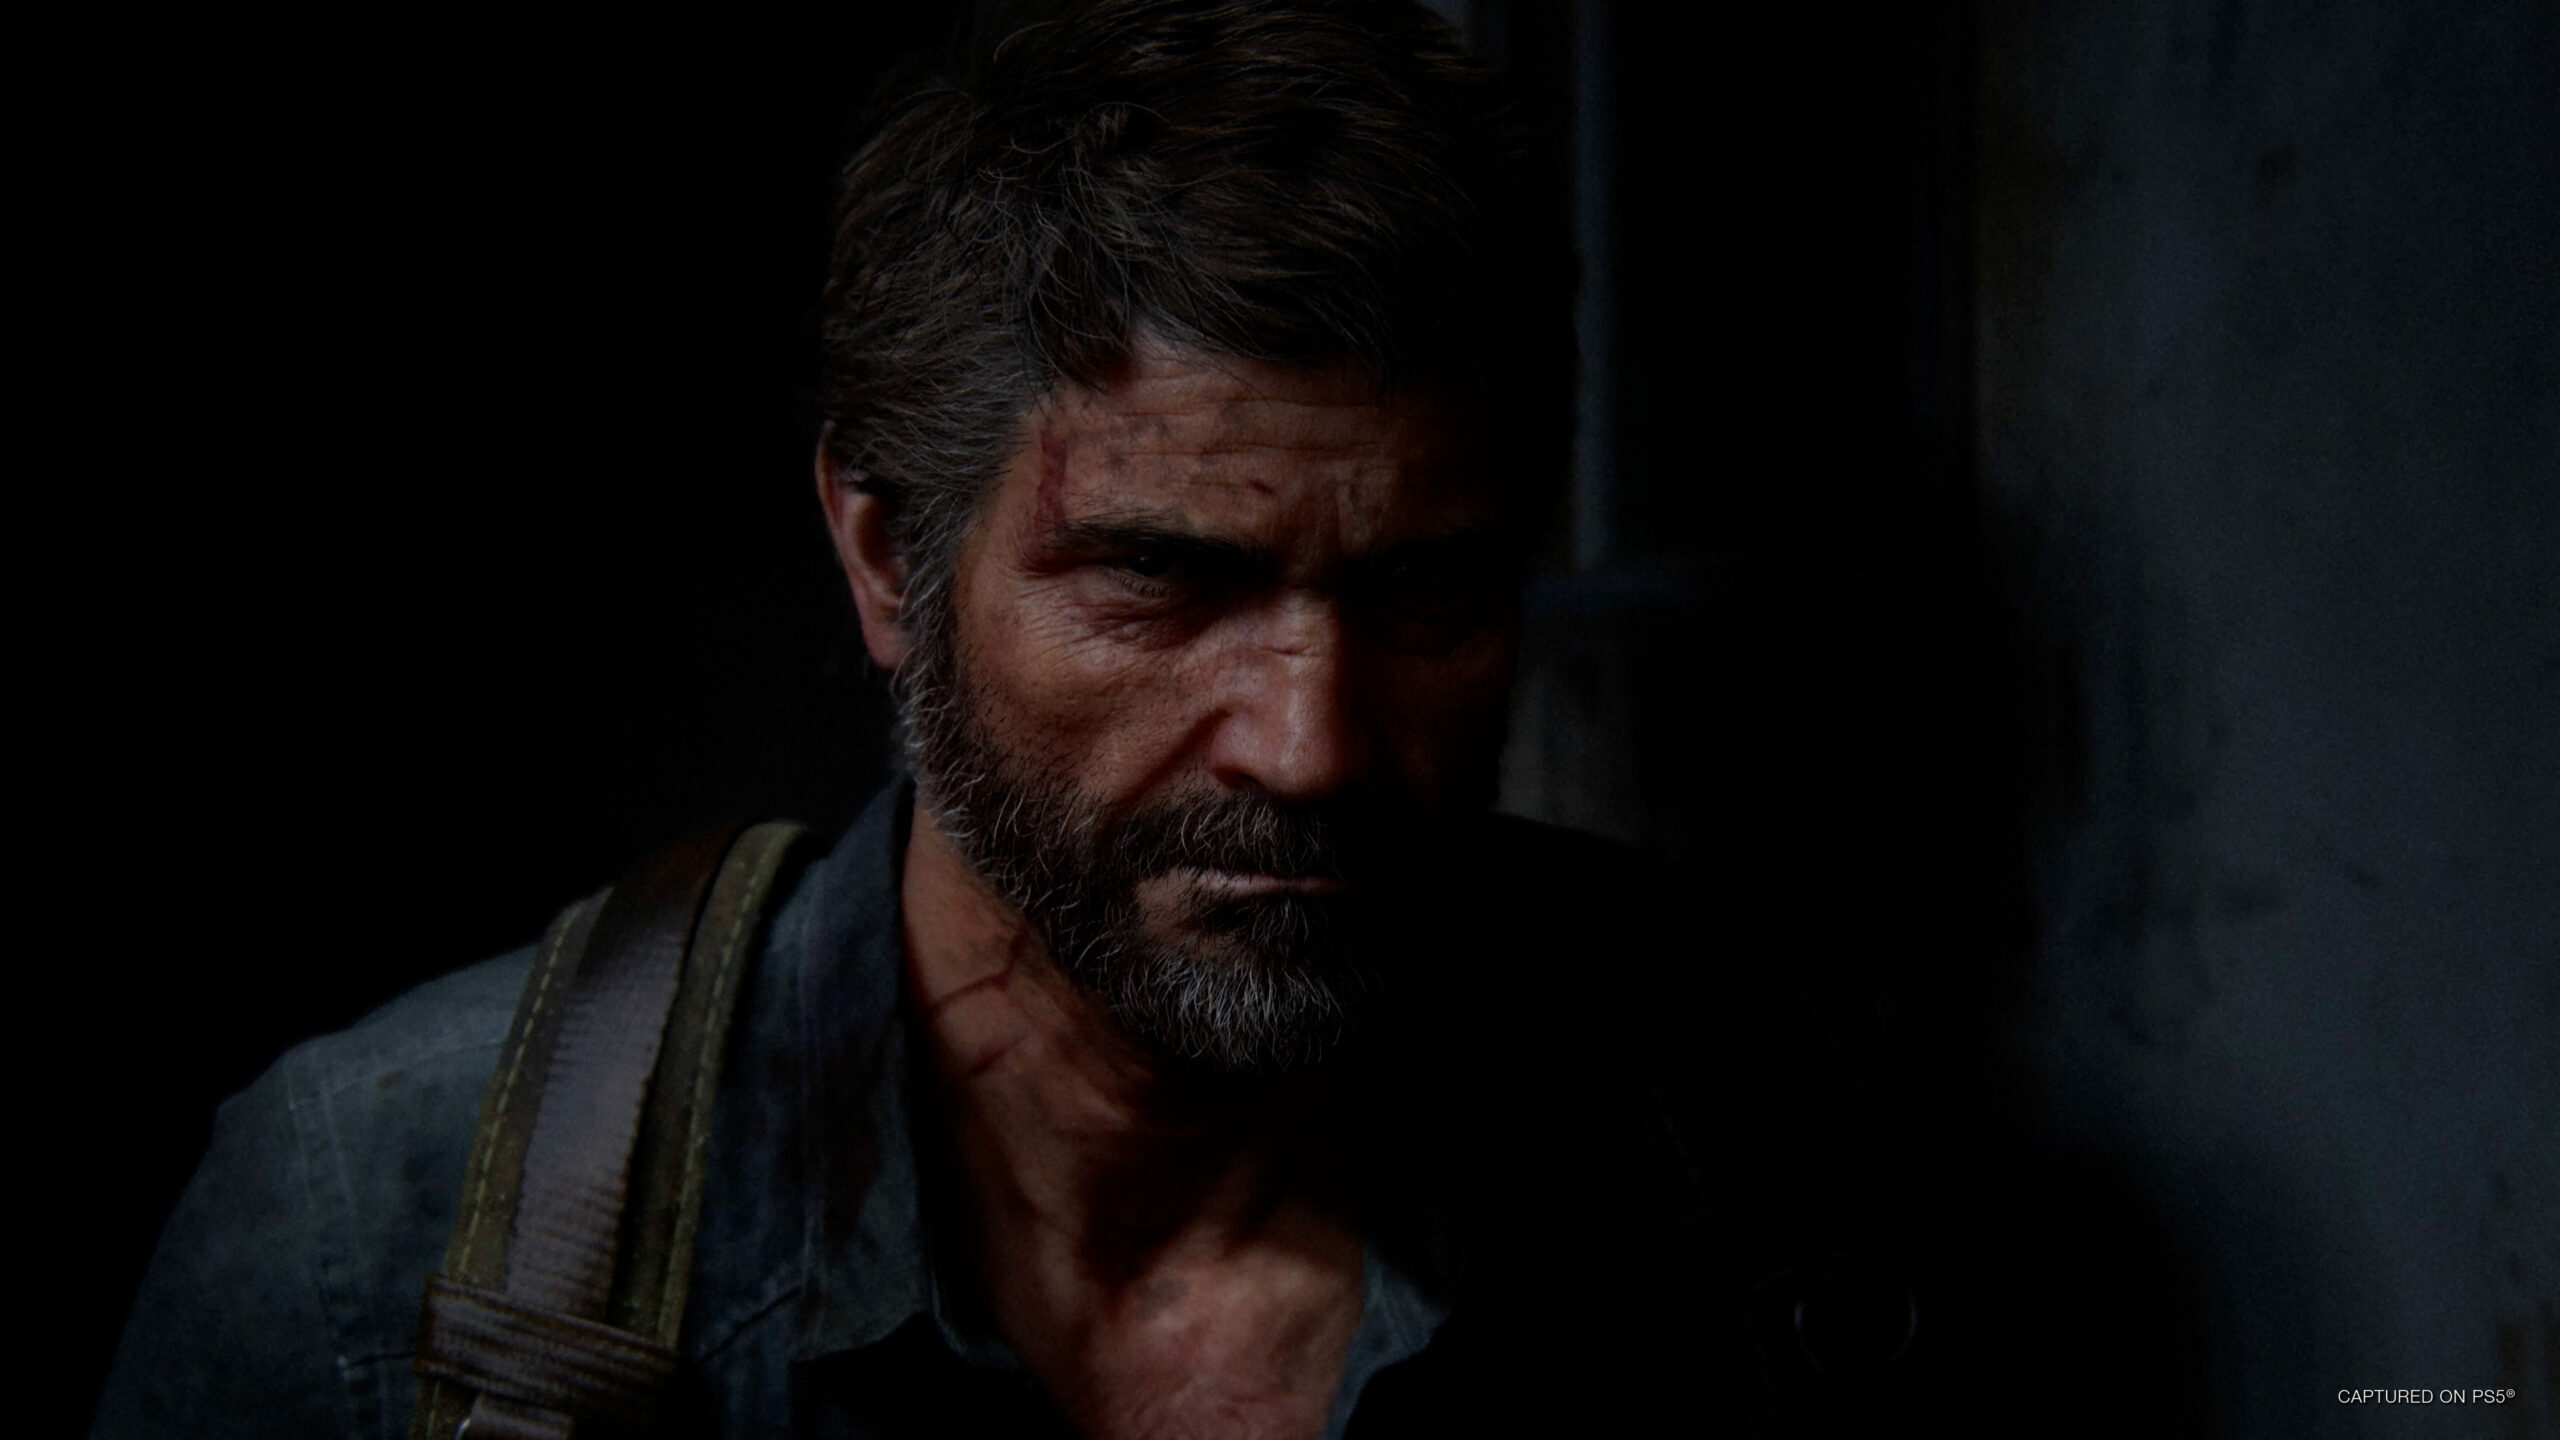 The Last Of Us 2 For PC: Release Date Estimation, News &…